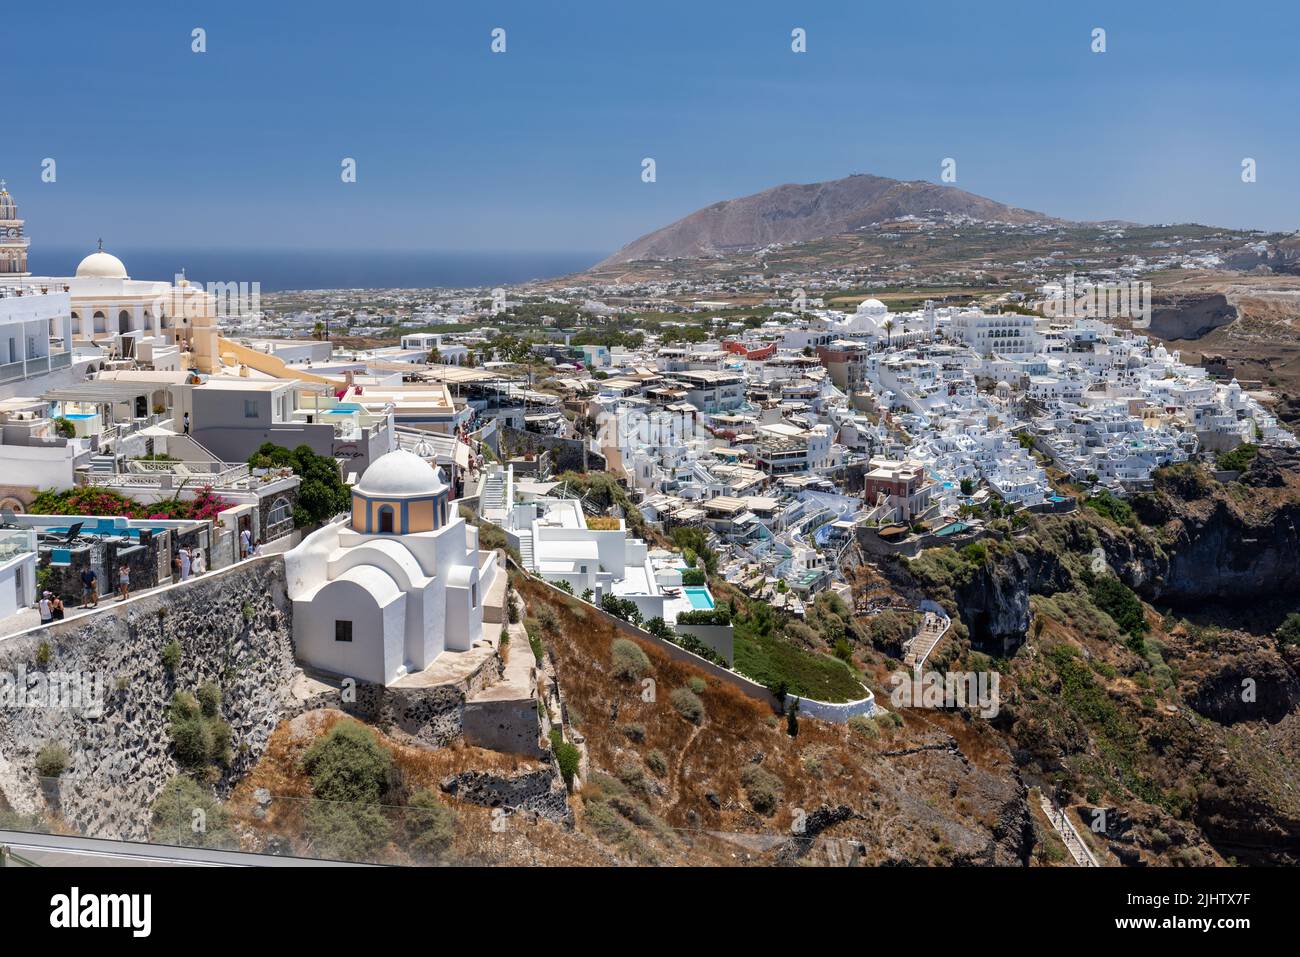 View of the capital town of Fira with St. Stylianos Catholic Church on the Caldera pathway, Thira, Santorini, Cyclades islands, Greece, Europe Stock Photo